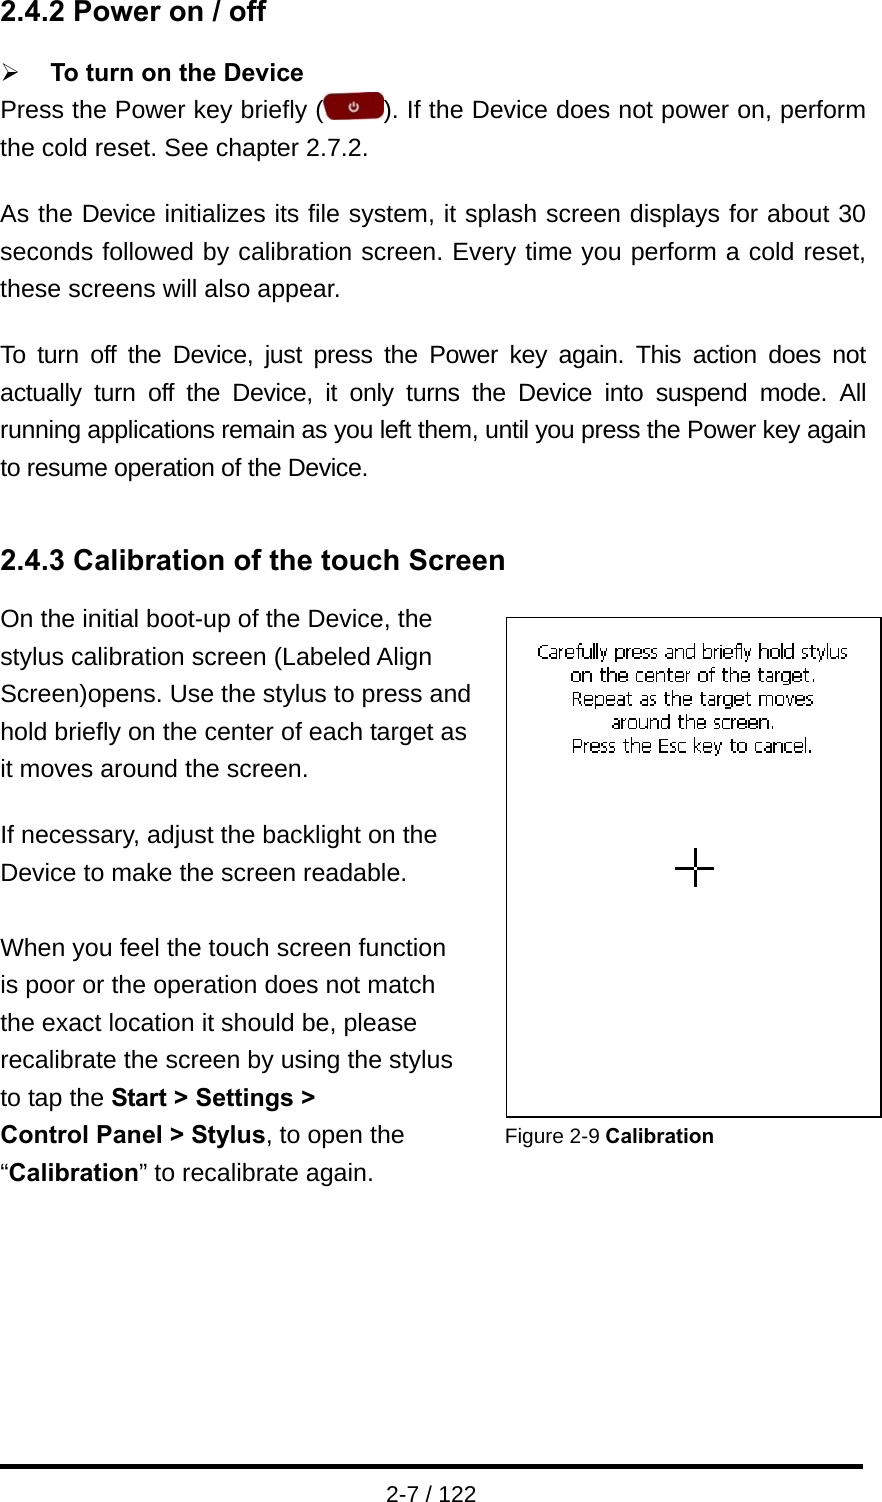  2-7 / 122 2.4.2 Power on / off  ¾ To turn on the Device Press the Power key briefly ( ). If the Device does not power on, perform the cold reset. See chapter 2.7.2.  As the Device initializes its file system, it splash screen displays for about 30 seconds followed by calibration screen. Every time you perform a cold reset, these screens will also appear.  To turn off the Device, just press the Power key again. This action does not actually turn off the Device, it only turns the Device into suspend mode. All running applications remain as you left them, until you press the Power key again to resume operation of the Device.   2.4.3 Calibration of the touch Screen On the initial boot-up of the Device, the   stylus calibration screen (Labeled Align   Screen)opens. Use the stylus to press and   hold briefly on the center of each target as it moves around the screen.  If necessary, adjust the backlight on the   Device to make the screen readable.    When you feel the touch screen function   is poor or the operation does not match   the exact location it should be, please   recalibrate the screen by using the stylus   to tap the Start &gt; Settings &gt;                Control Panel &gt; Stylus, to open the        Figure 2-9 Calibration “Calibration” to recalibrate again.                